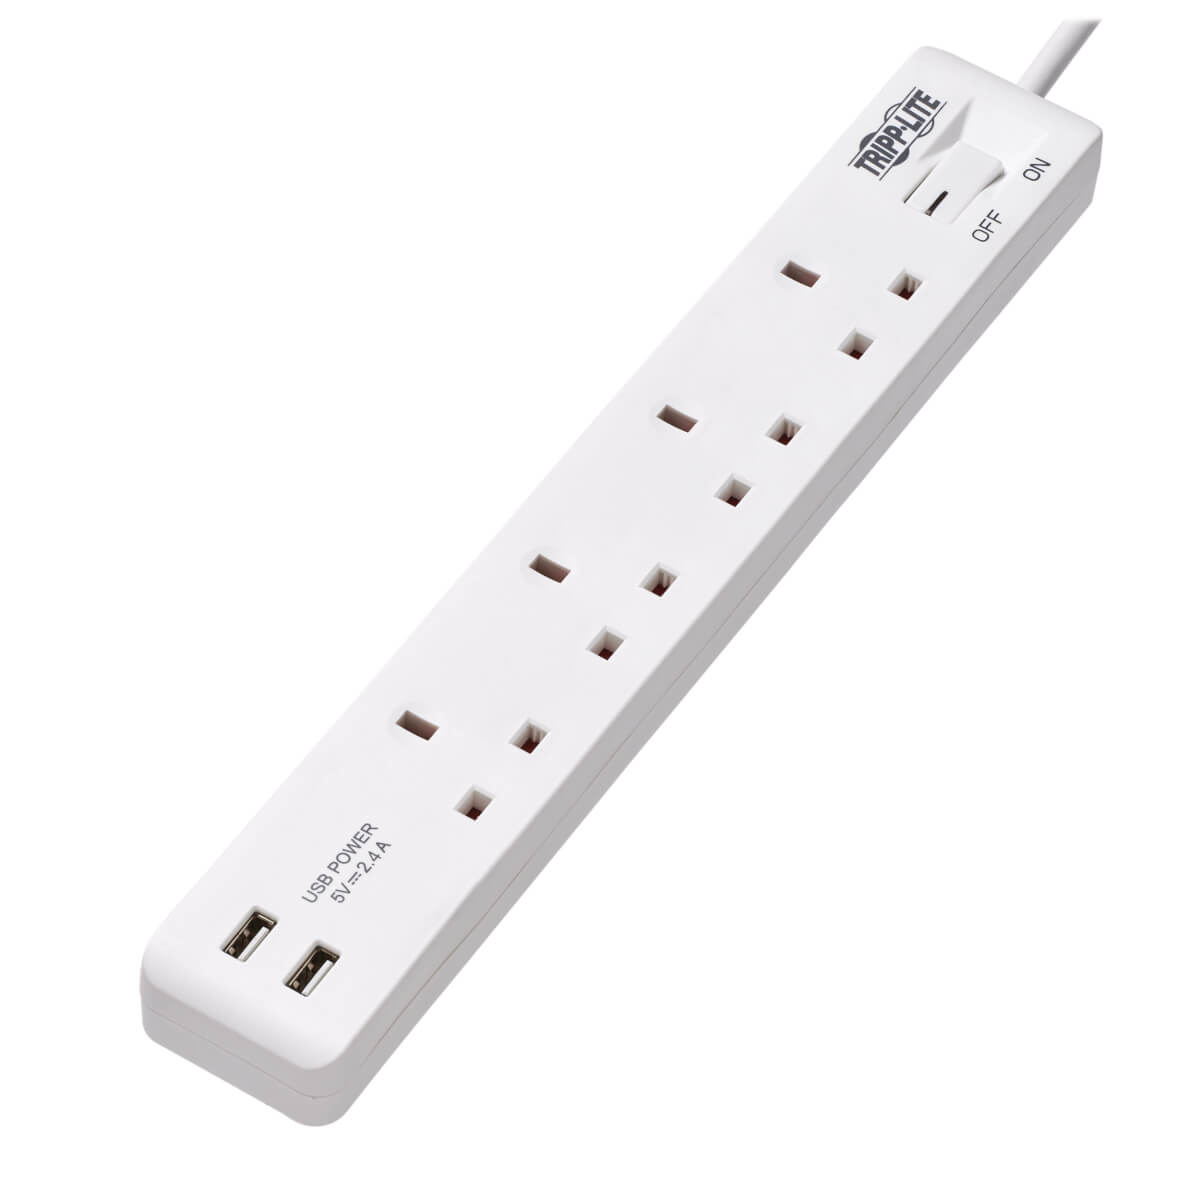 Tripp Lite 4-Outlet Power Strip With USB-A Charging - BS1363A Outlets, 220-250V, 13A, 1.8 M Cord, BS1363A Plug, White - Power Strip - 13 A - AC 230 V - Input: BS 1363A - Output Connectors: 4  - C2000